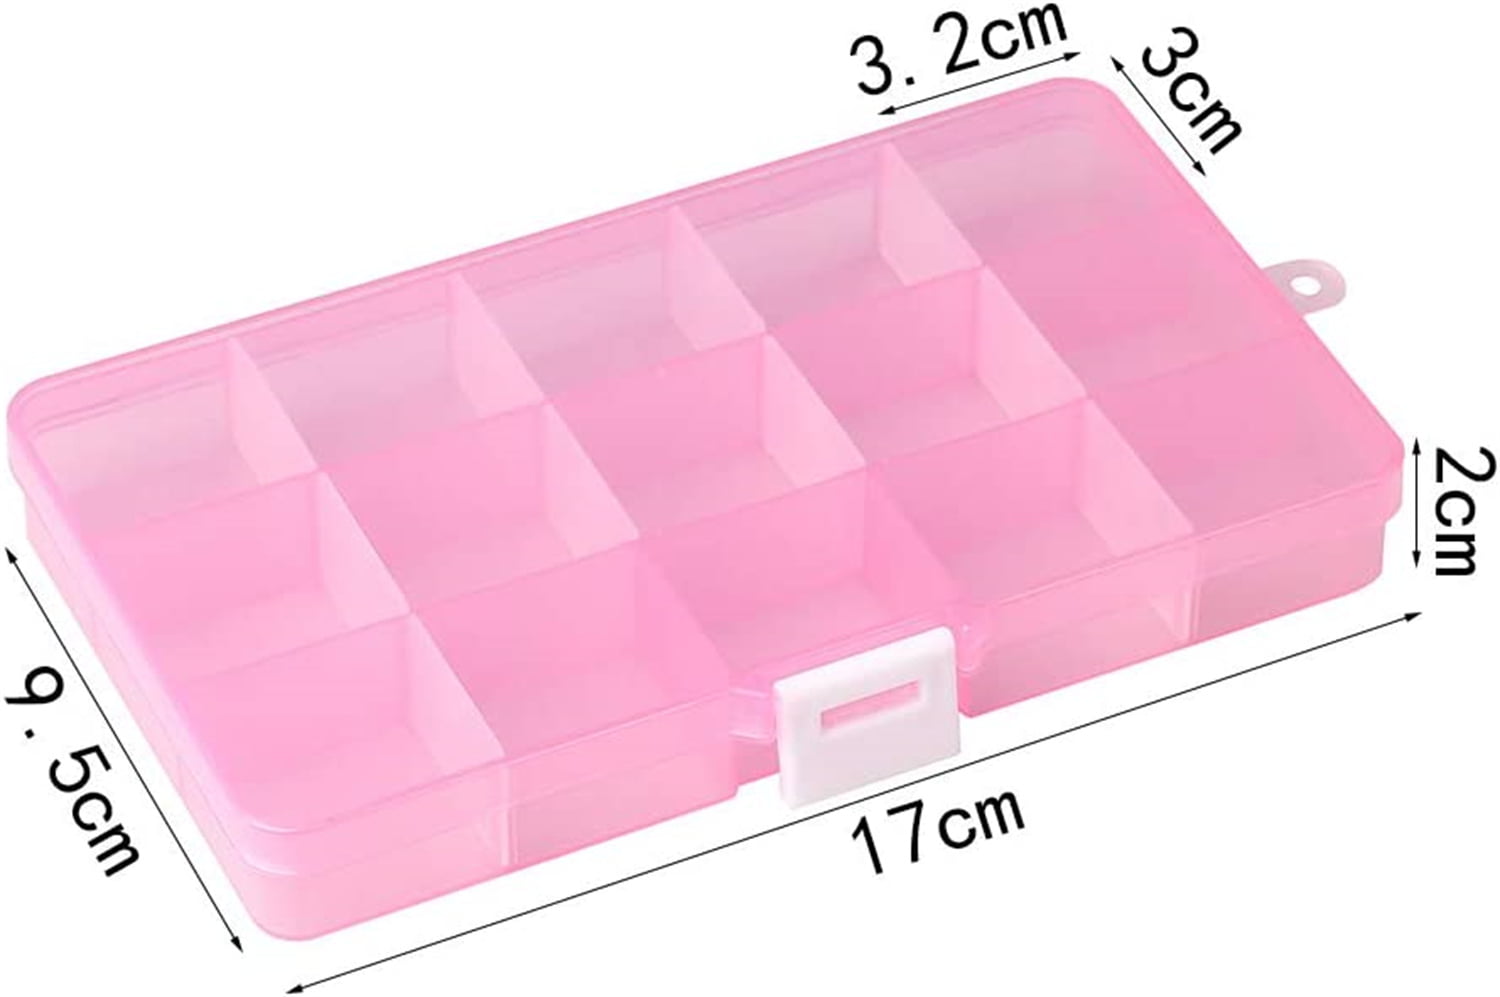 CRASPIRE 4 pcs 4 PACK 12 Grids Plastic Storage Box Jewellery Box  Compartment Organizer Earring Storage Containers Clear Plastic Bead Case (22.5x15.3x3cm)